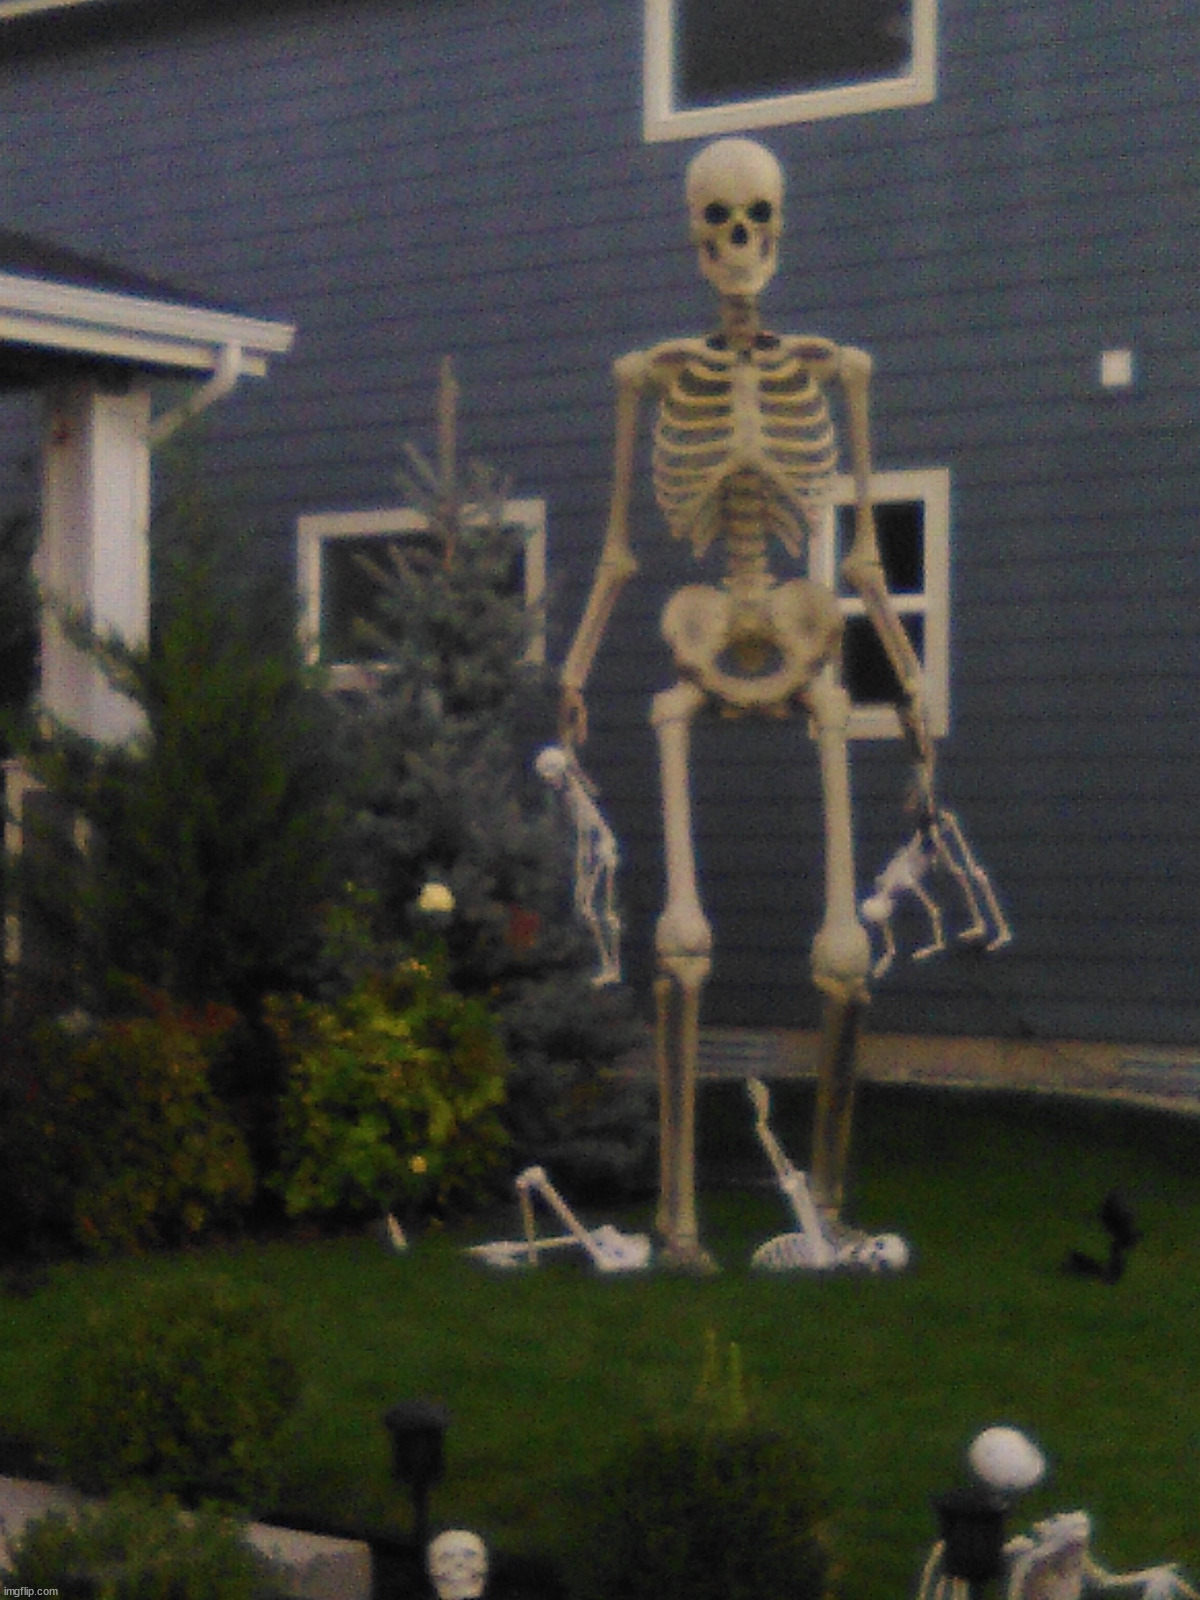 Saw these in my neighborhood this year. | image tagged in picture,spooky | made w/ Imgflip meme maker